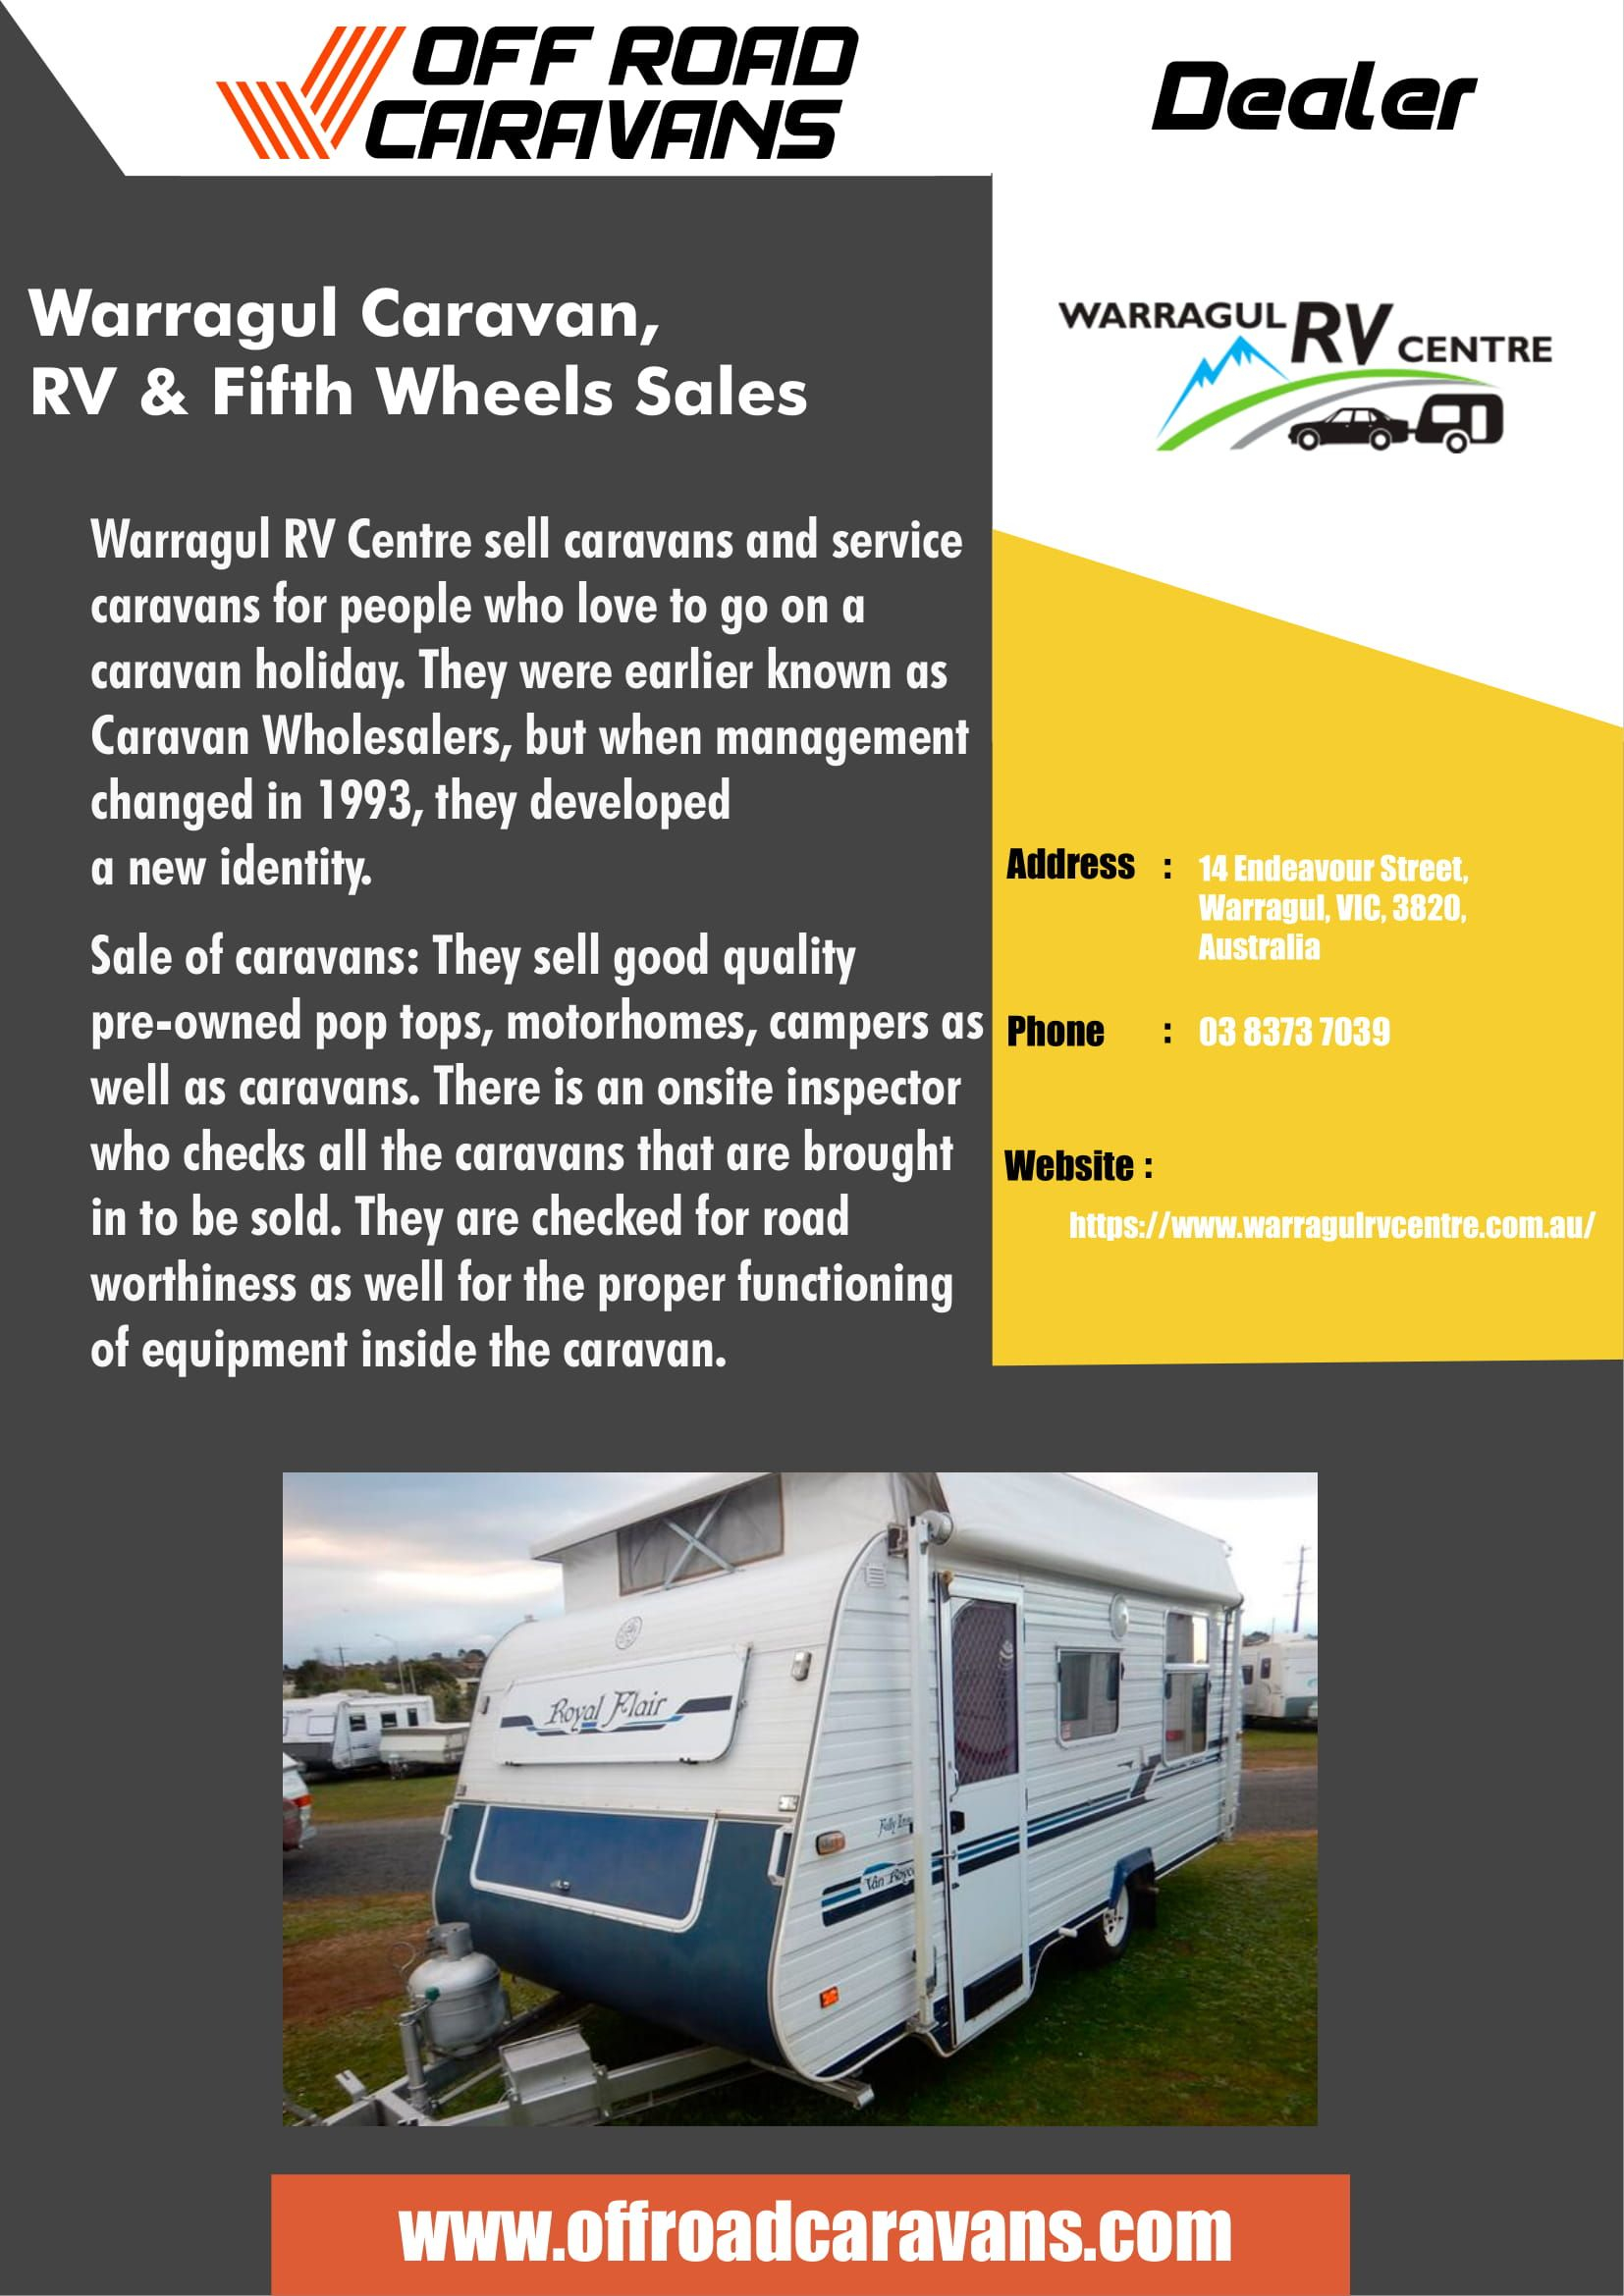 Verified List Of Off Road Caravan Dealers That Best Suits intended for size 1654 X 2339